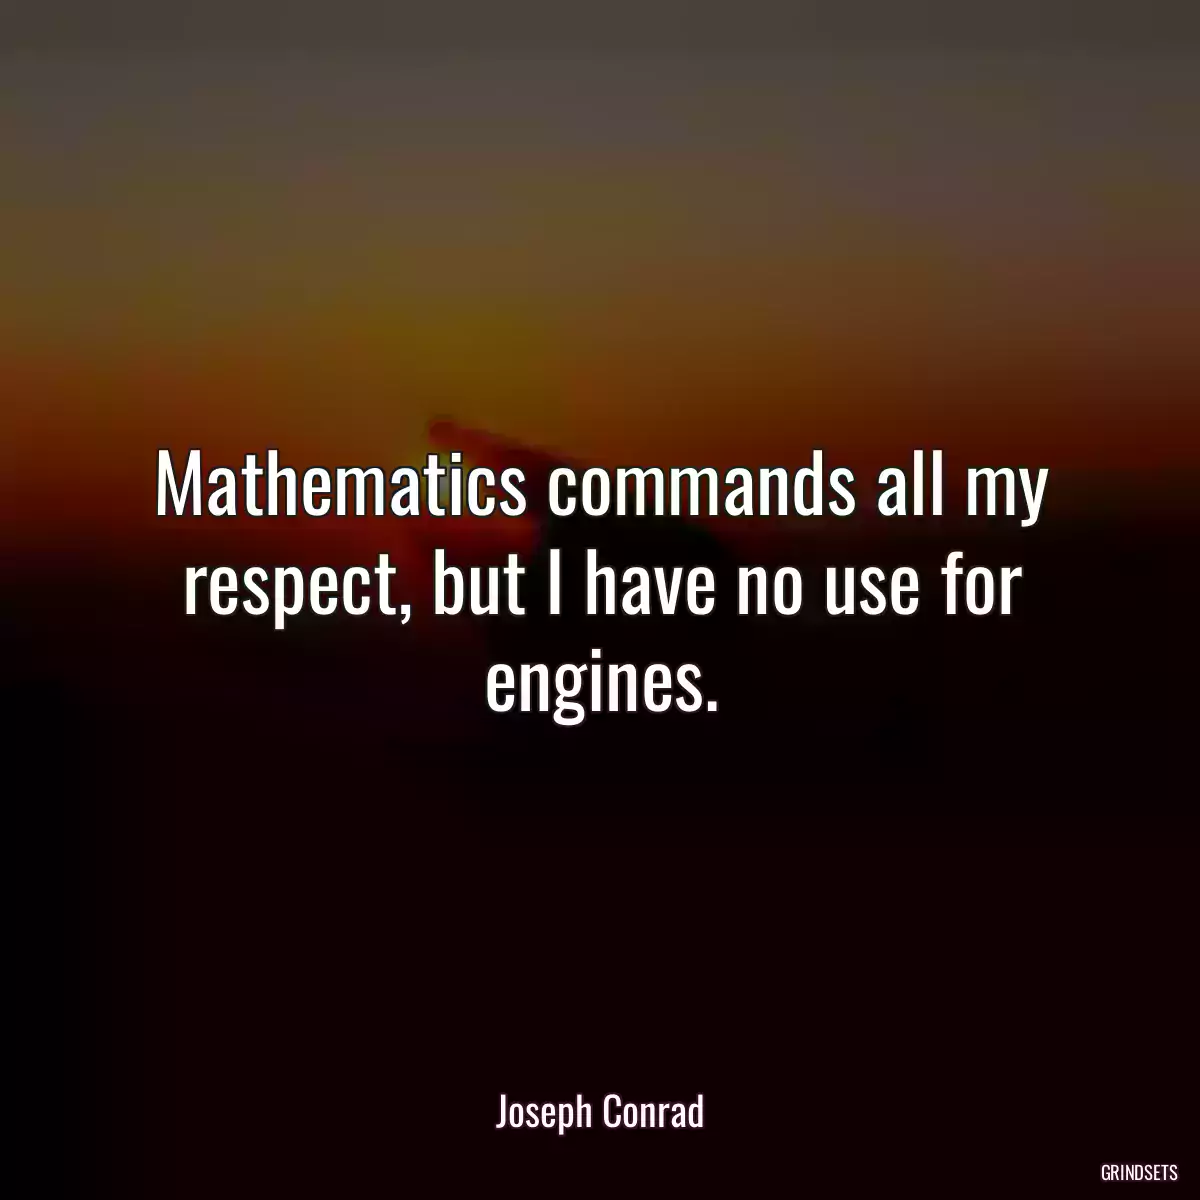 Mathematics commands all my respect, but I have no use for engines.